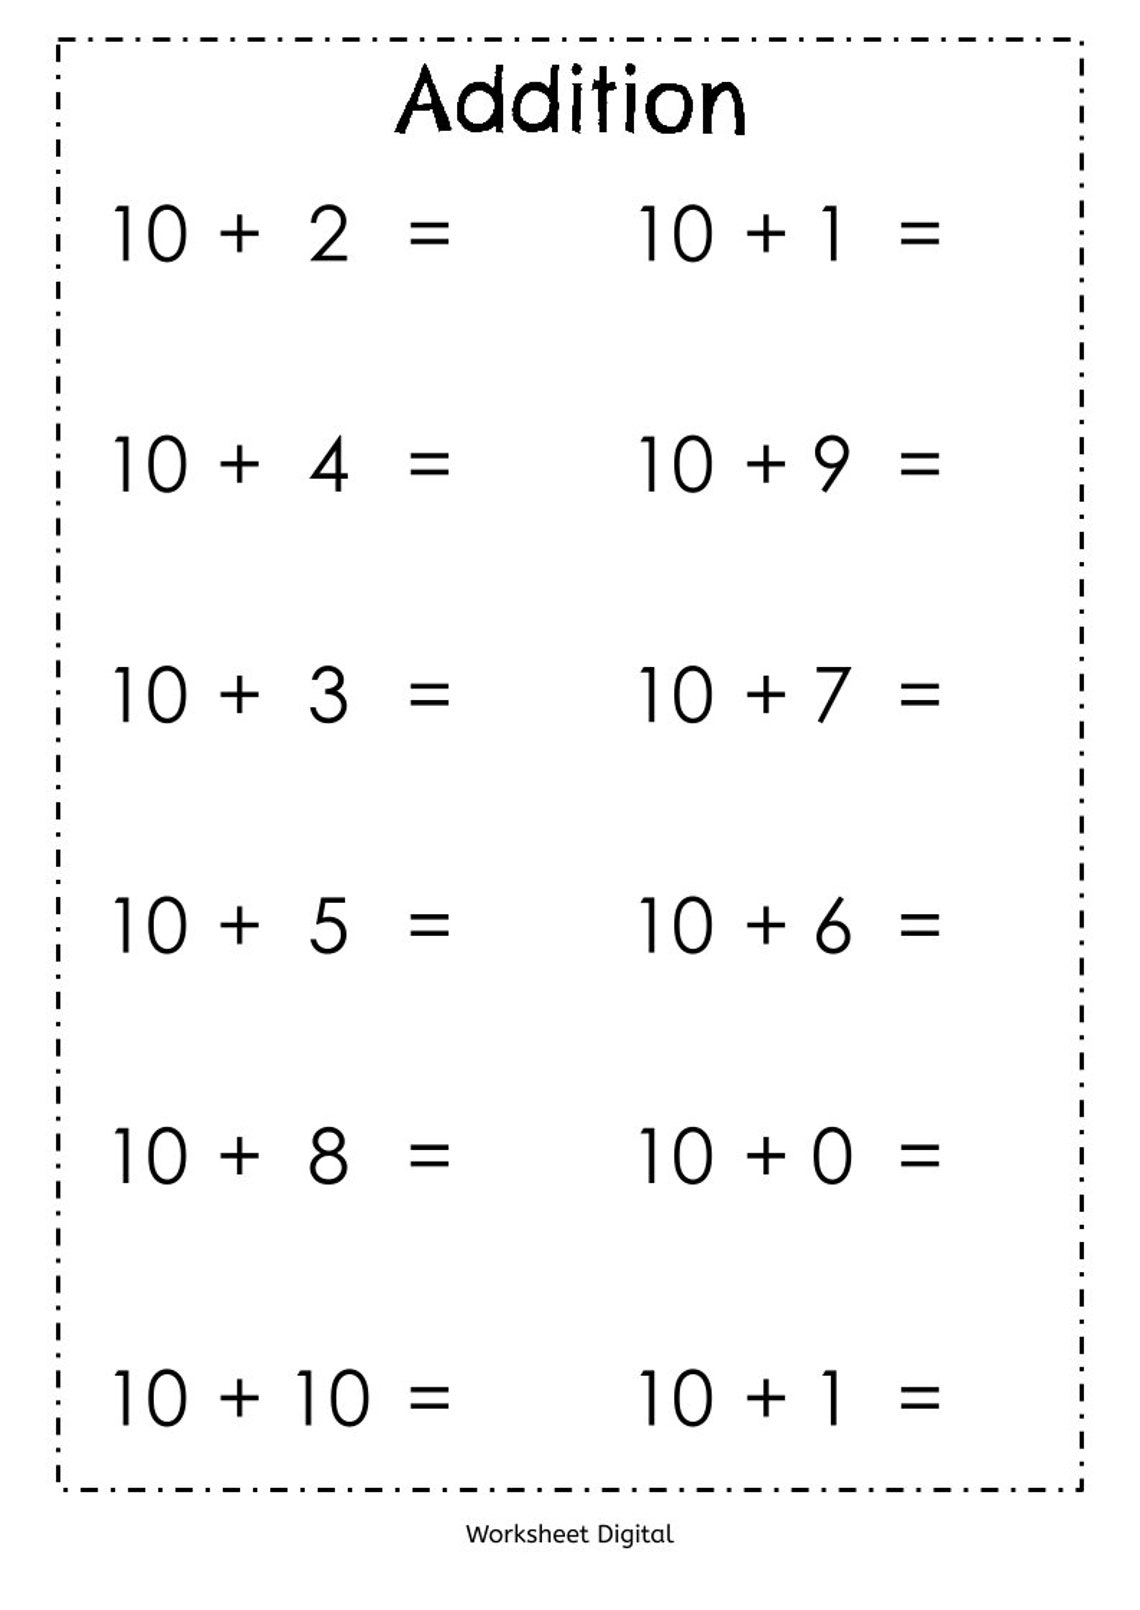 20-printable-addition-worksheets-numbers-1-10-for-preschool